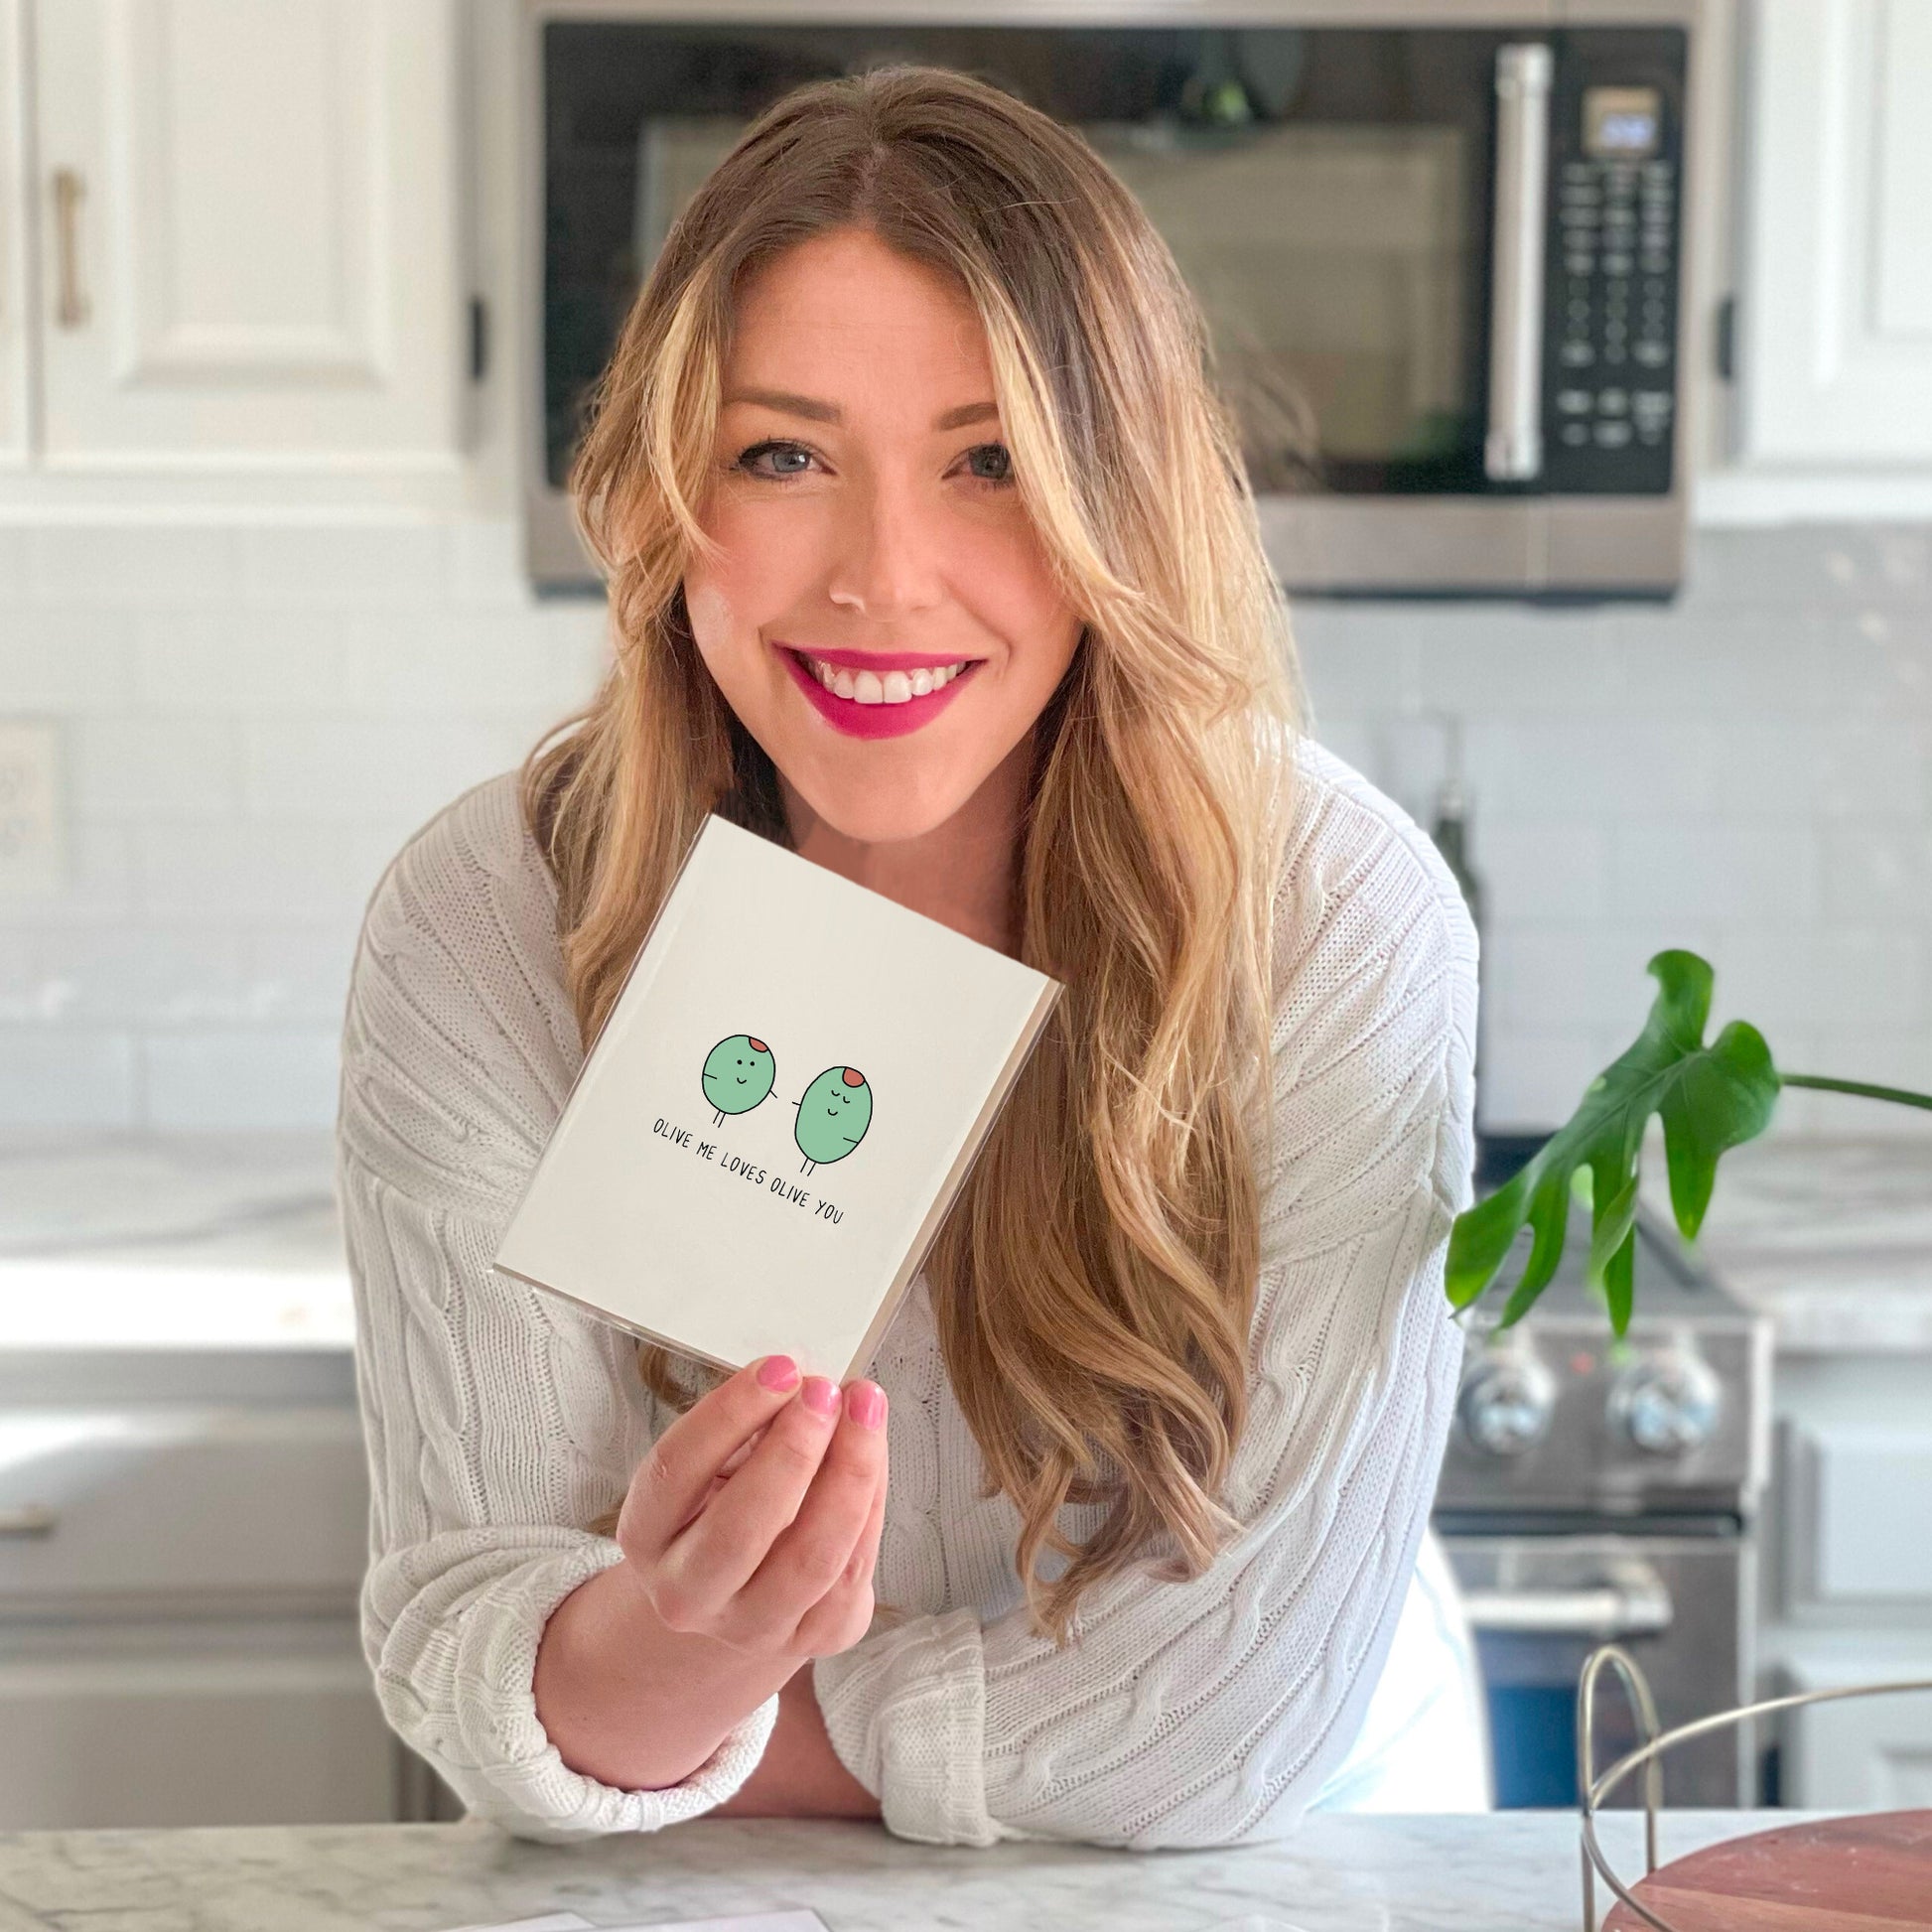 A woman is holding an Olive Me Card in front of a kitchen counter.